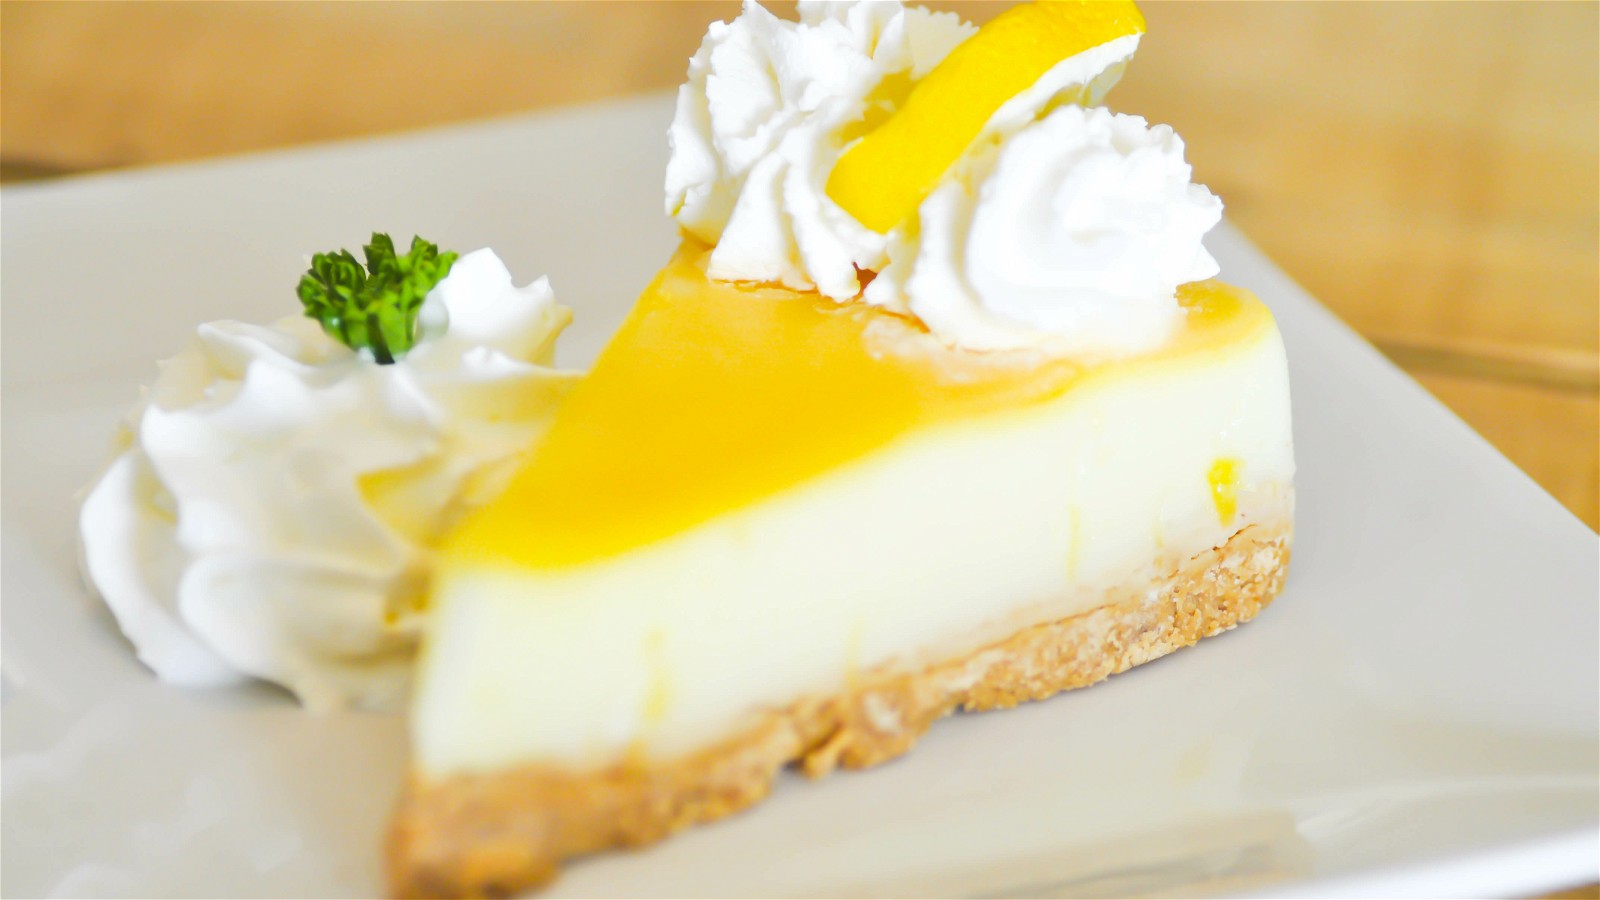 Image of Lemon Cheesecake Topped with Lemon Curd